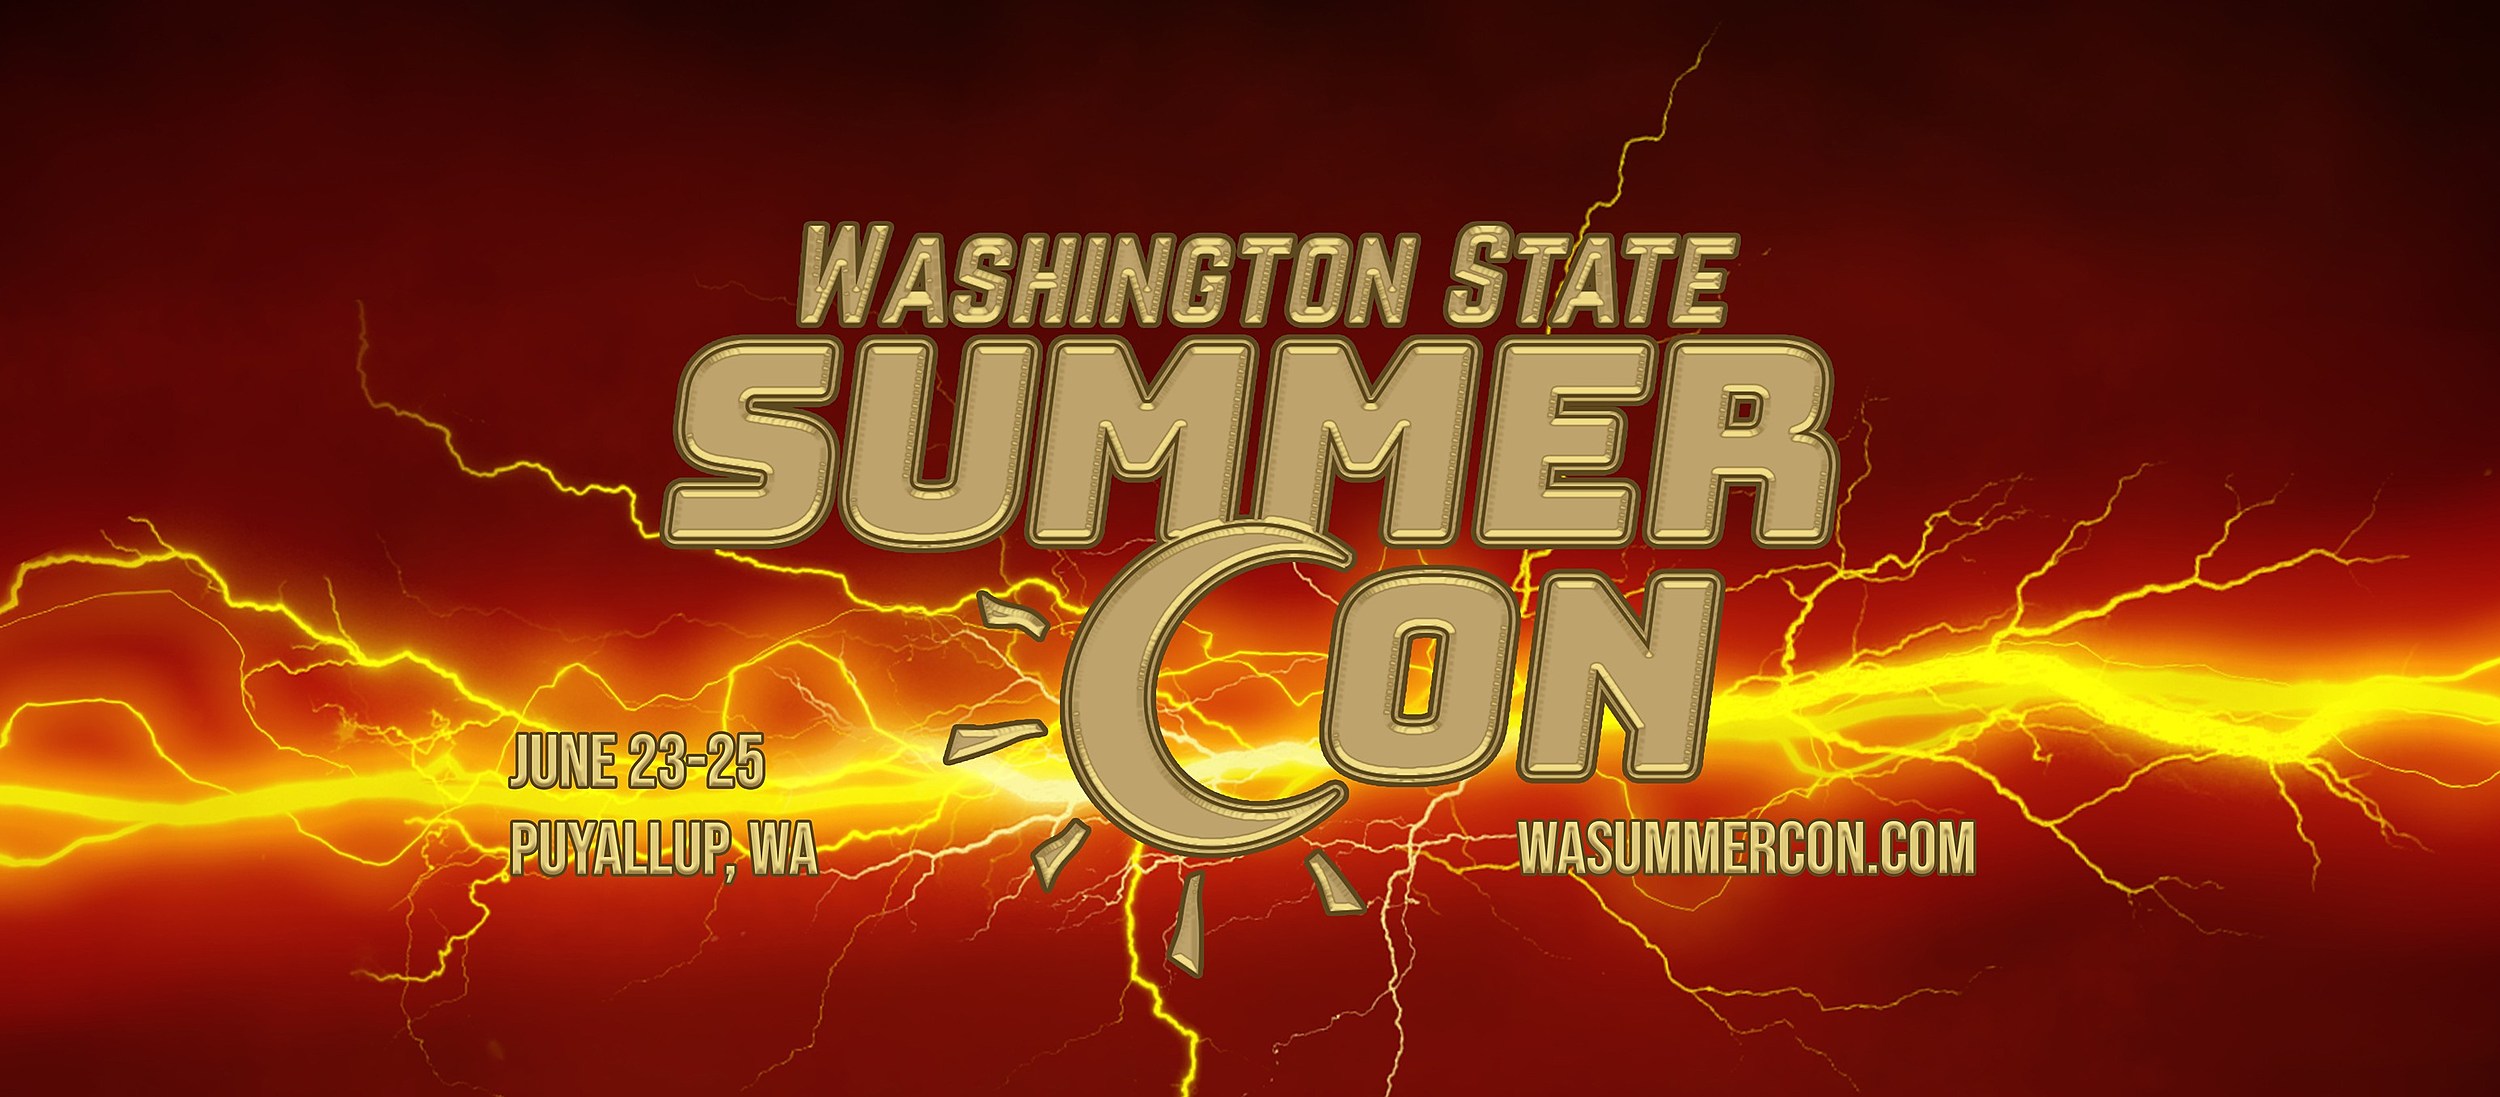 Washington Ranked Top 10 Fun State What Makes It So Special?